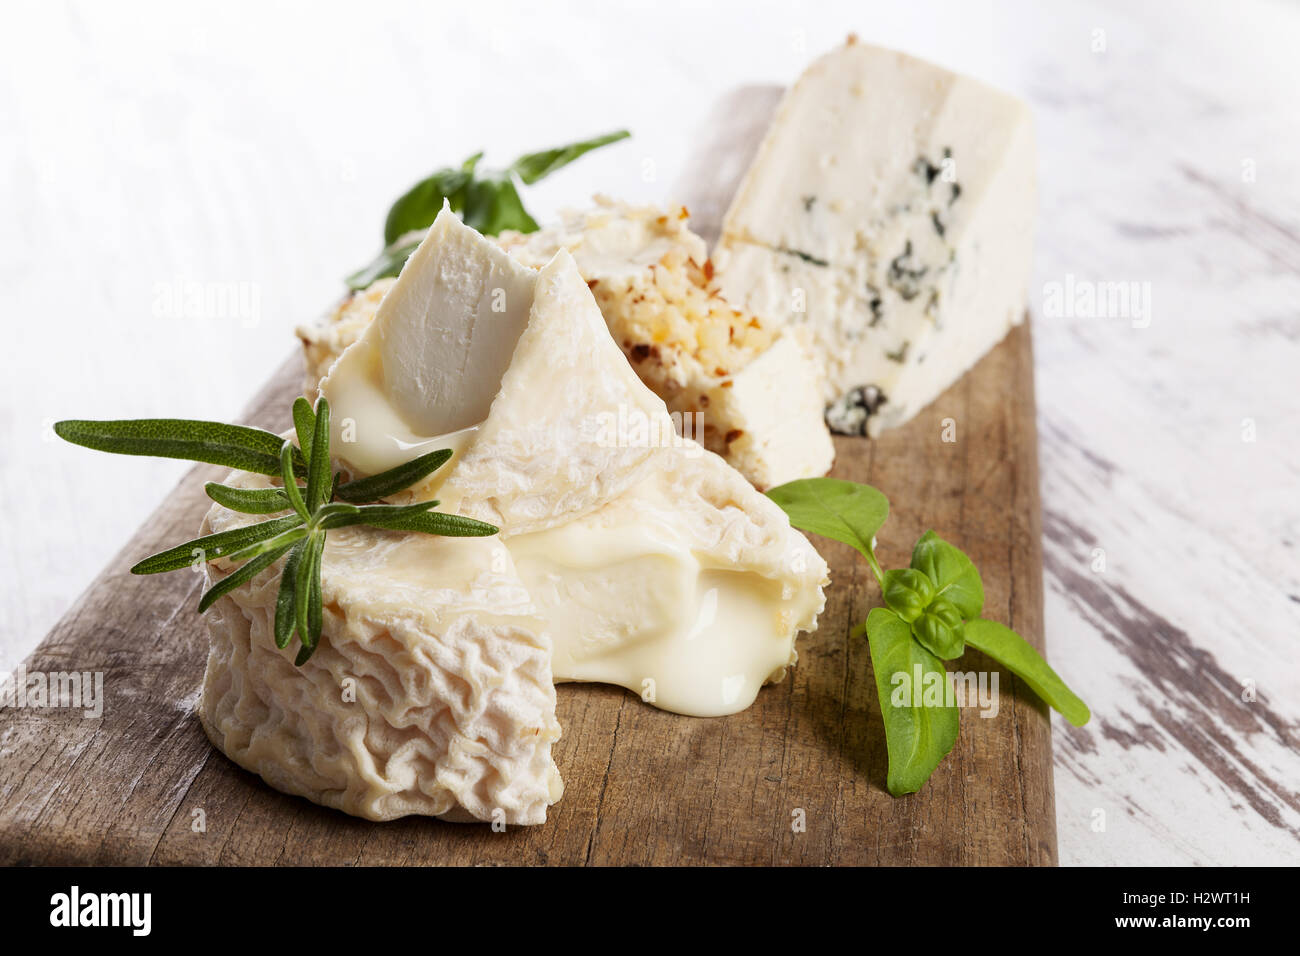 Variation fromage de luxe Banque D'Images